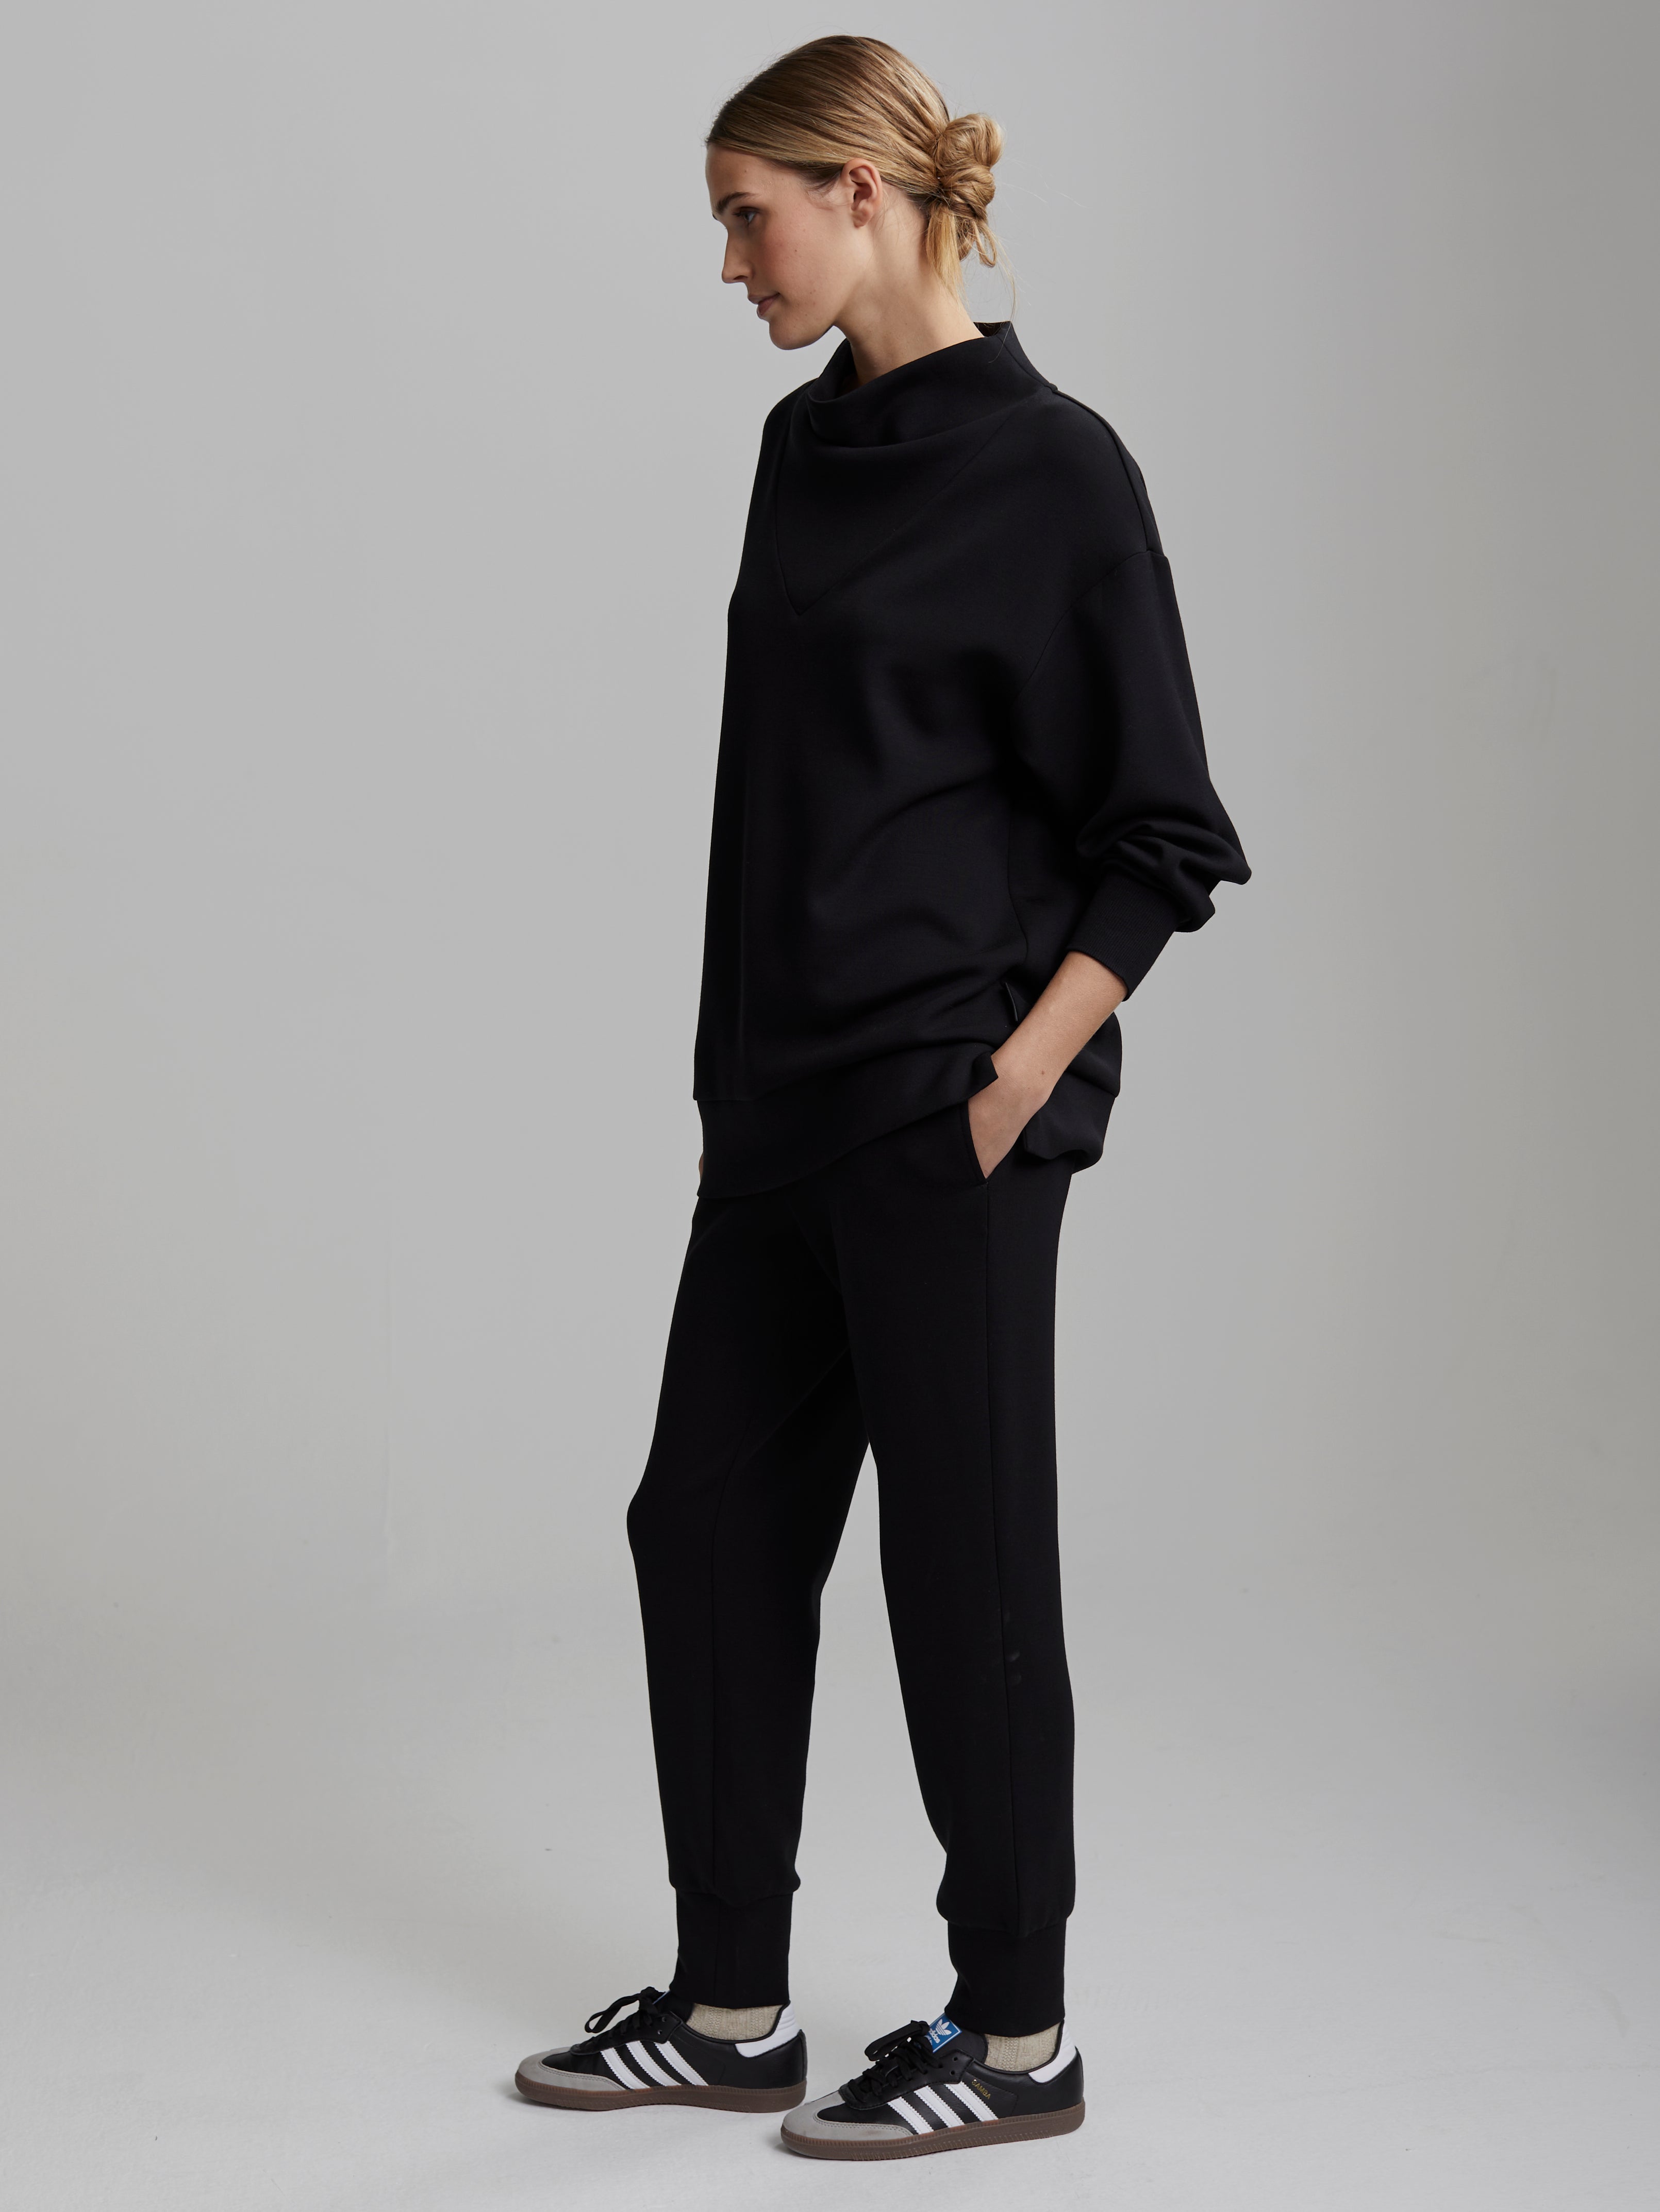 VARLEY  The Slim Cuff Pant 27.5 -Black – madaboutstyle